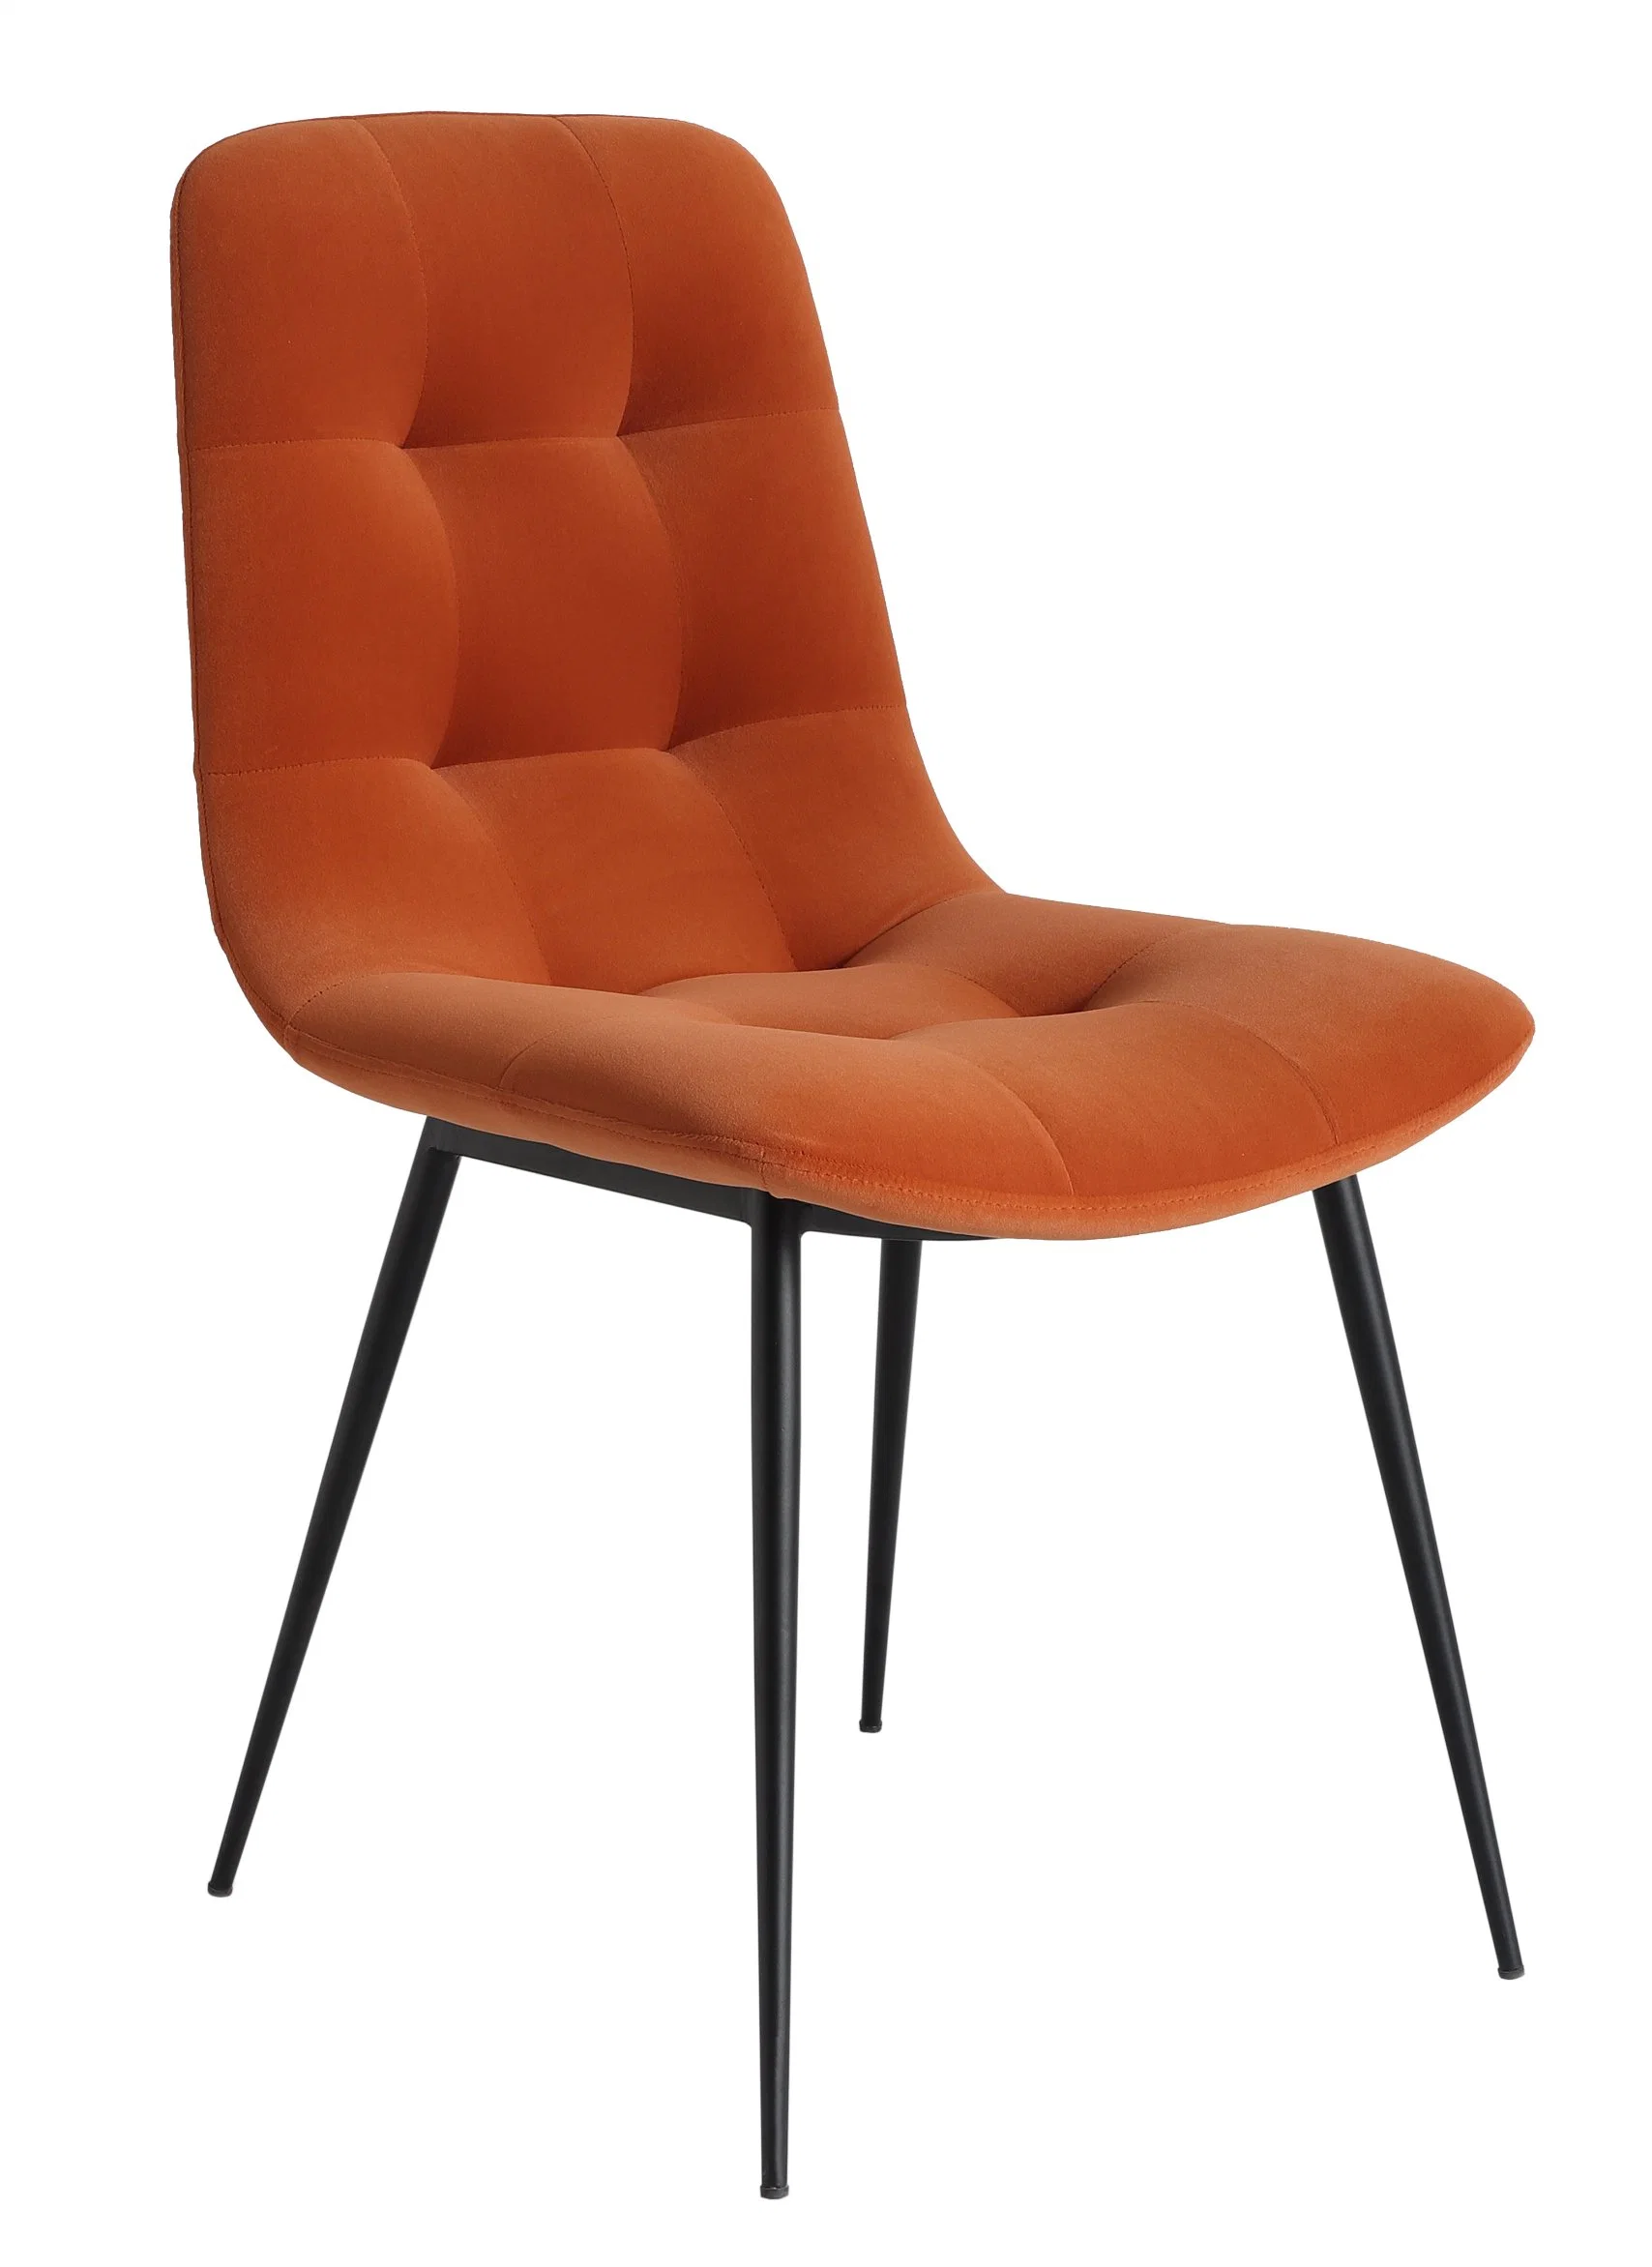 Fashion Wholesale/Supplier Orange Fabric Velvet with Metal Legs Dining Chair